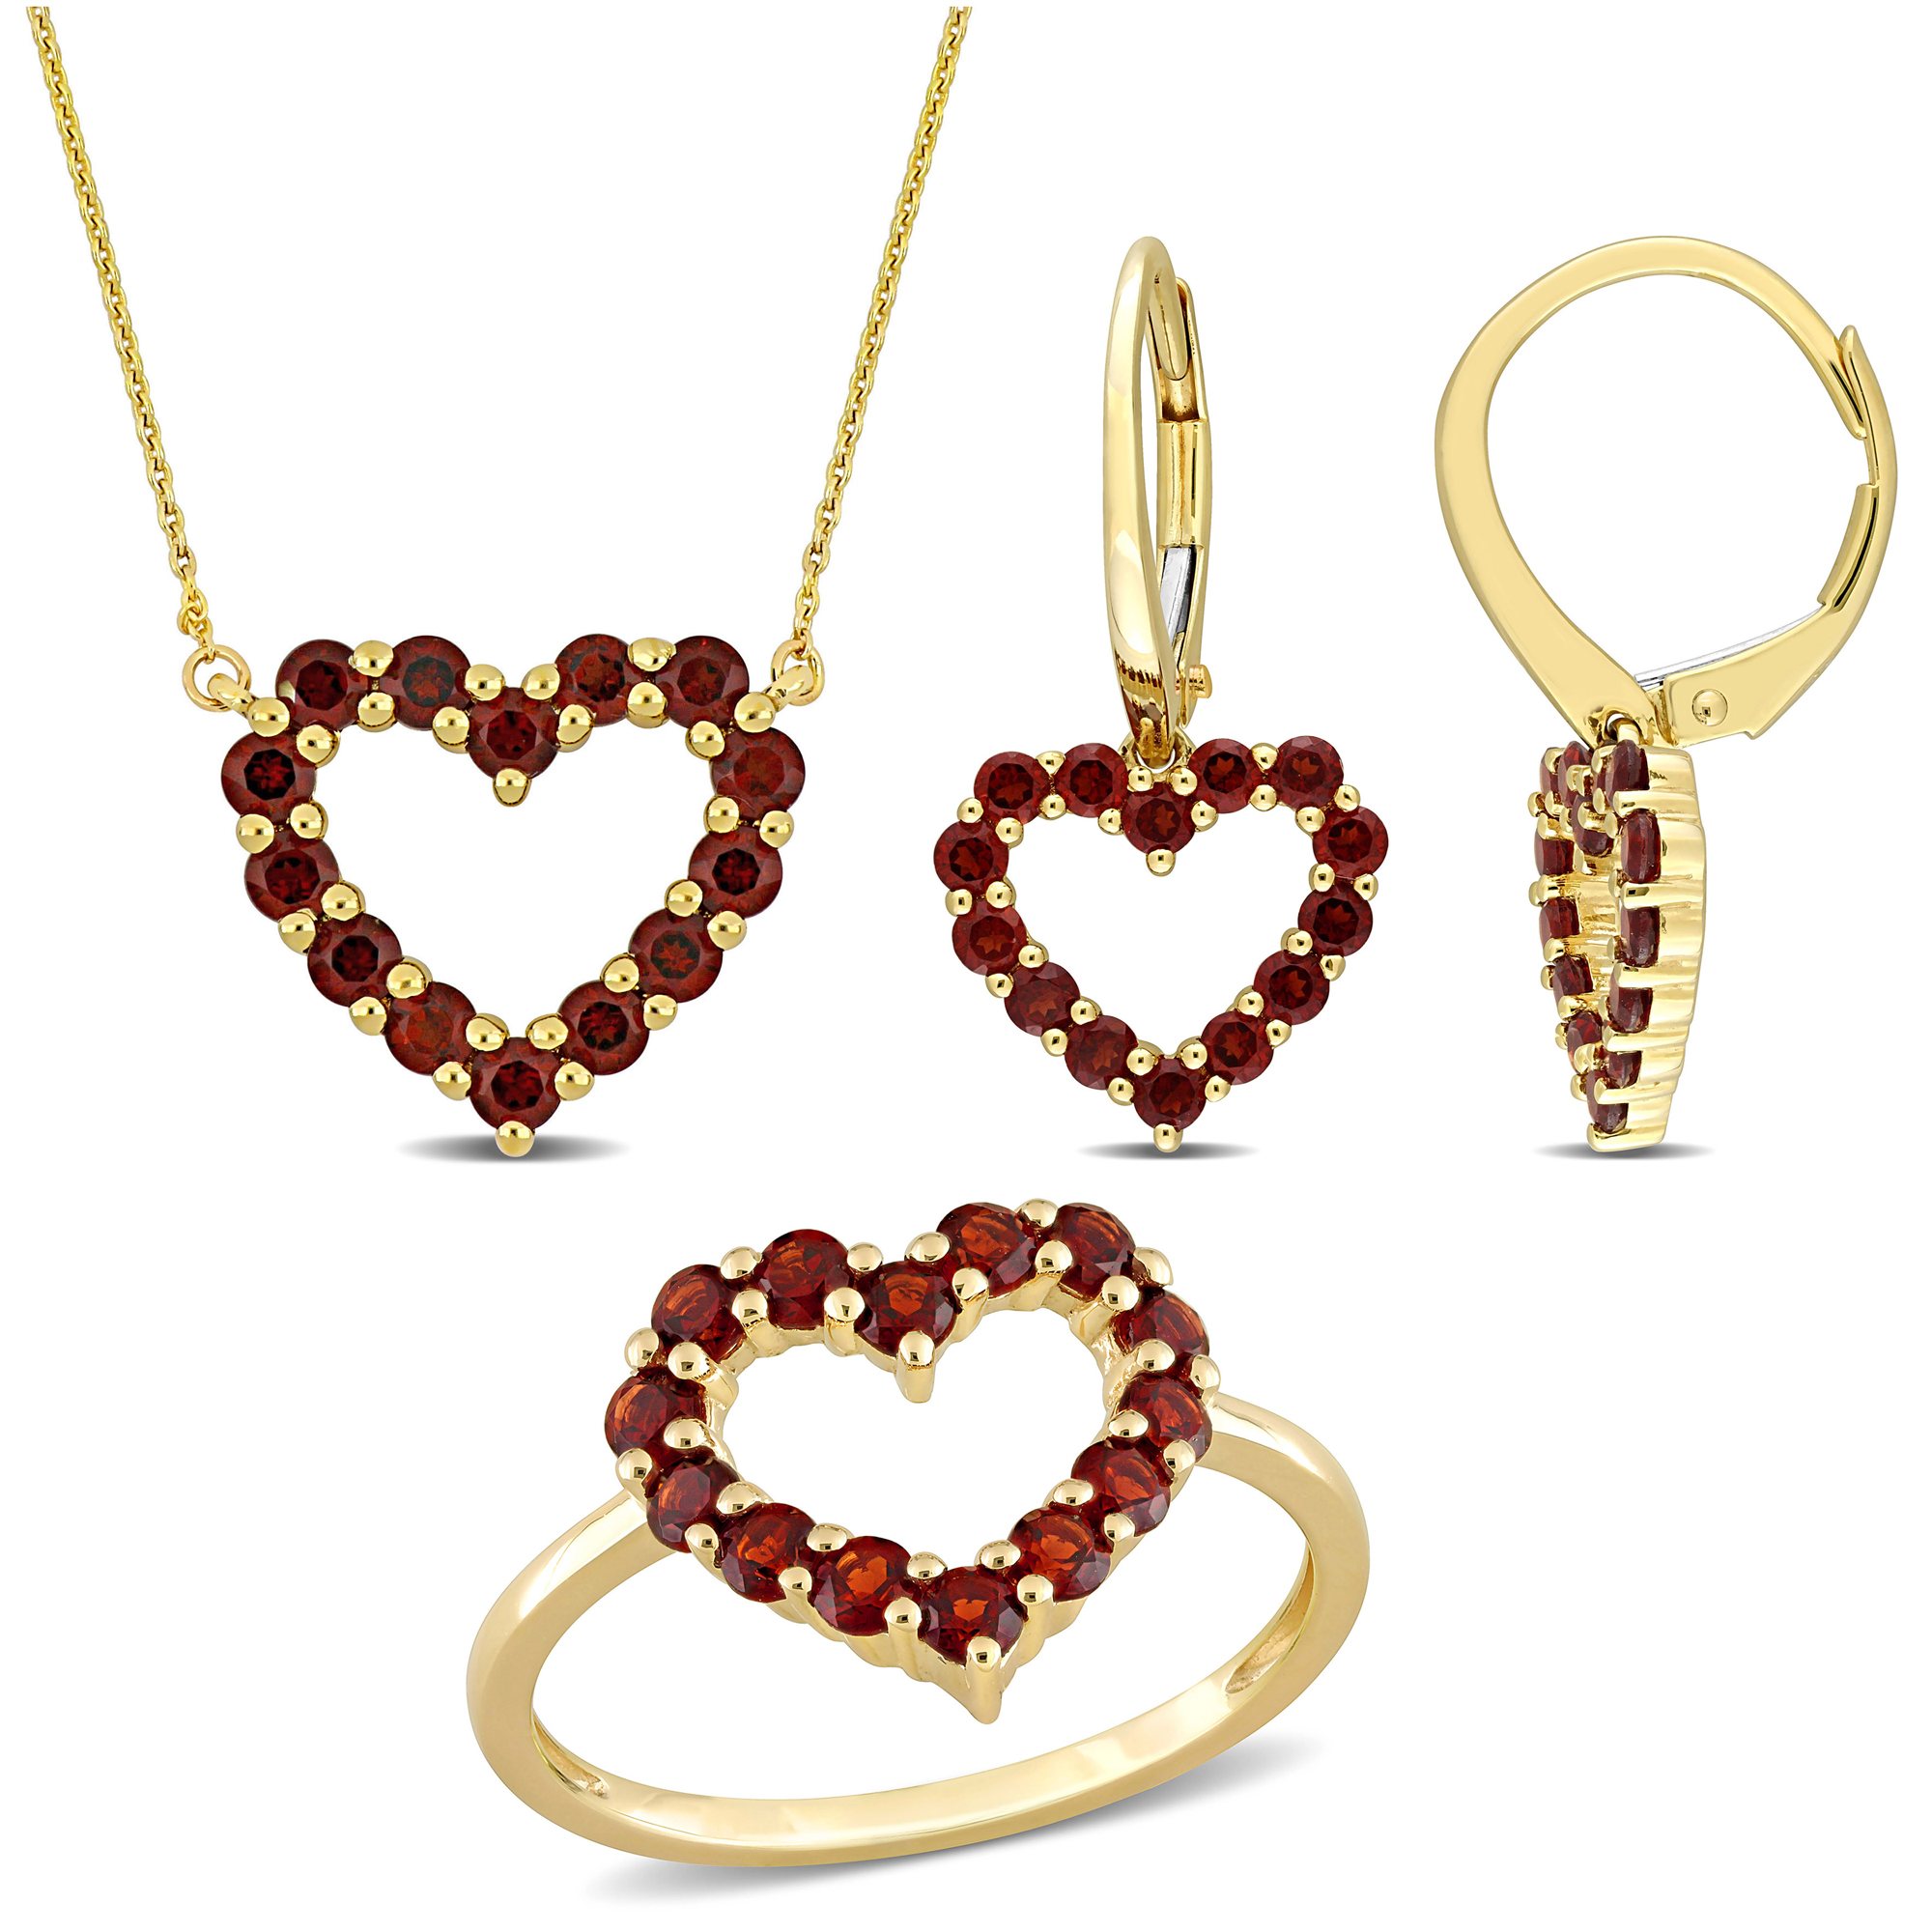 Garnet Heart Yellow Gold Earrings, Necklace, and Ring Gift Set - Size 8